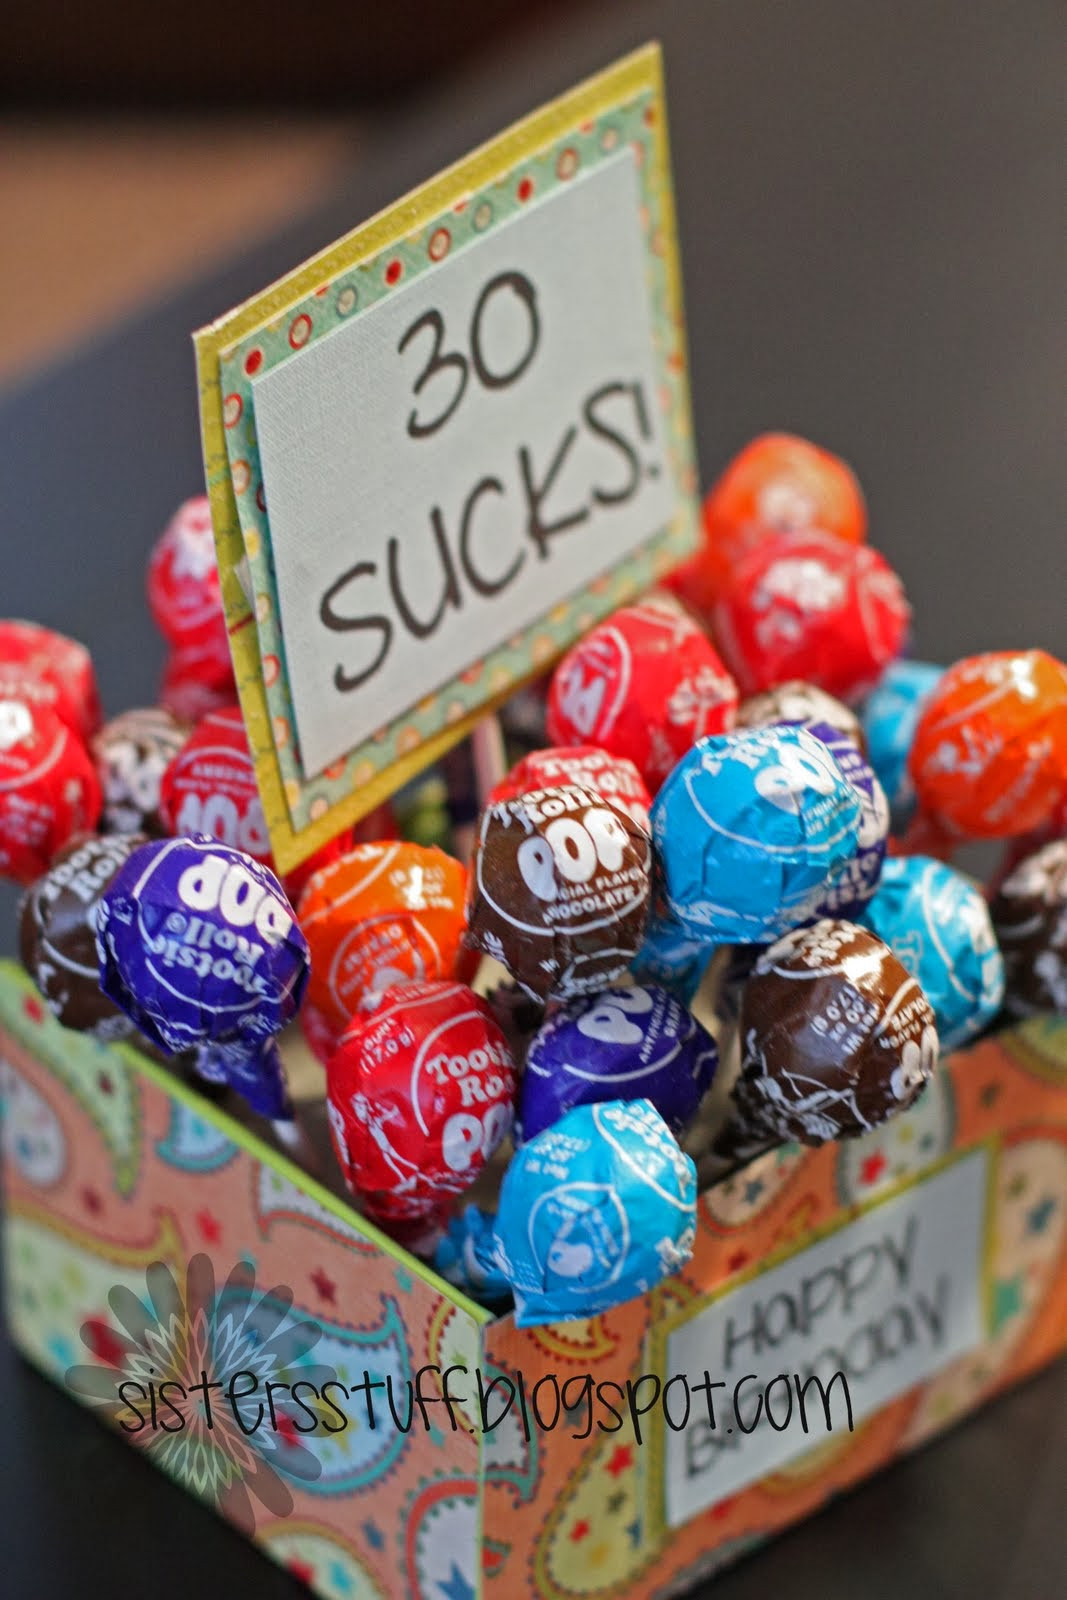 30 Year Old Birthday Gift Ideas
 Celebrate In Style With These 50 DIY 30th Birthday Ideas